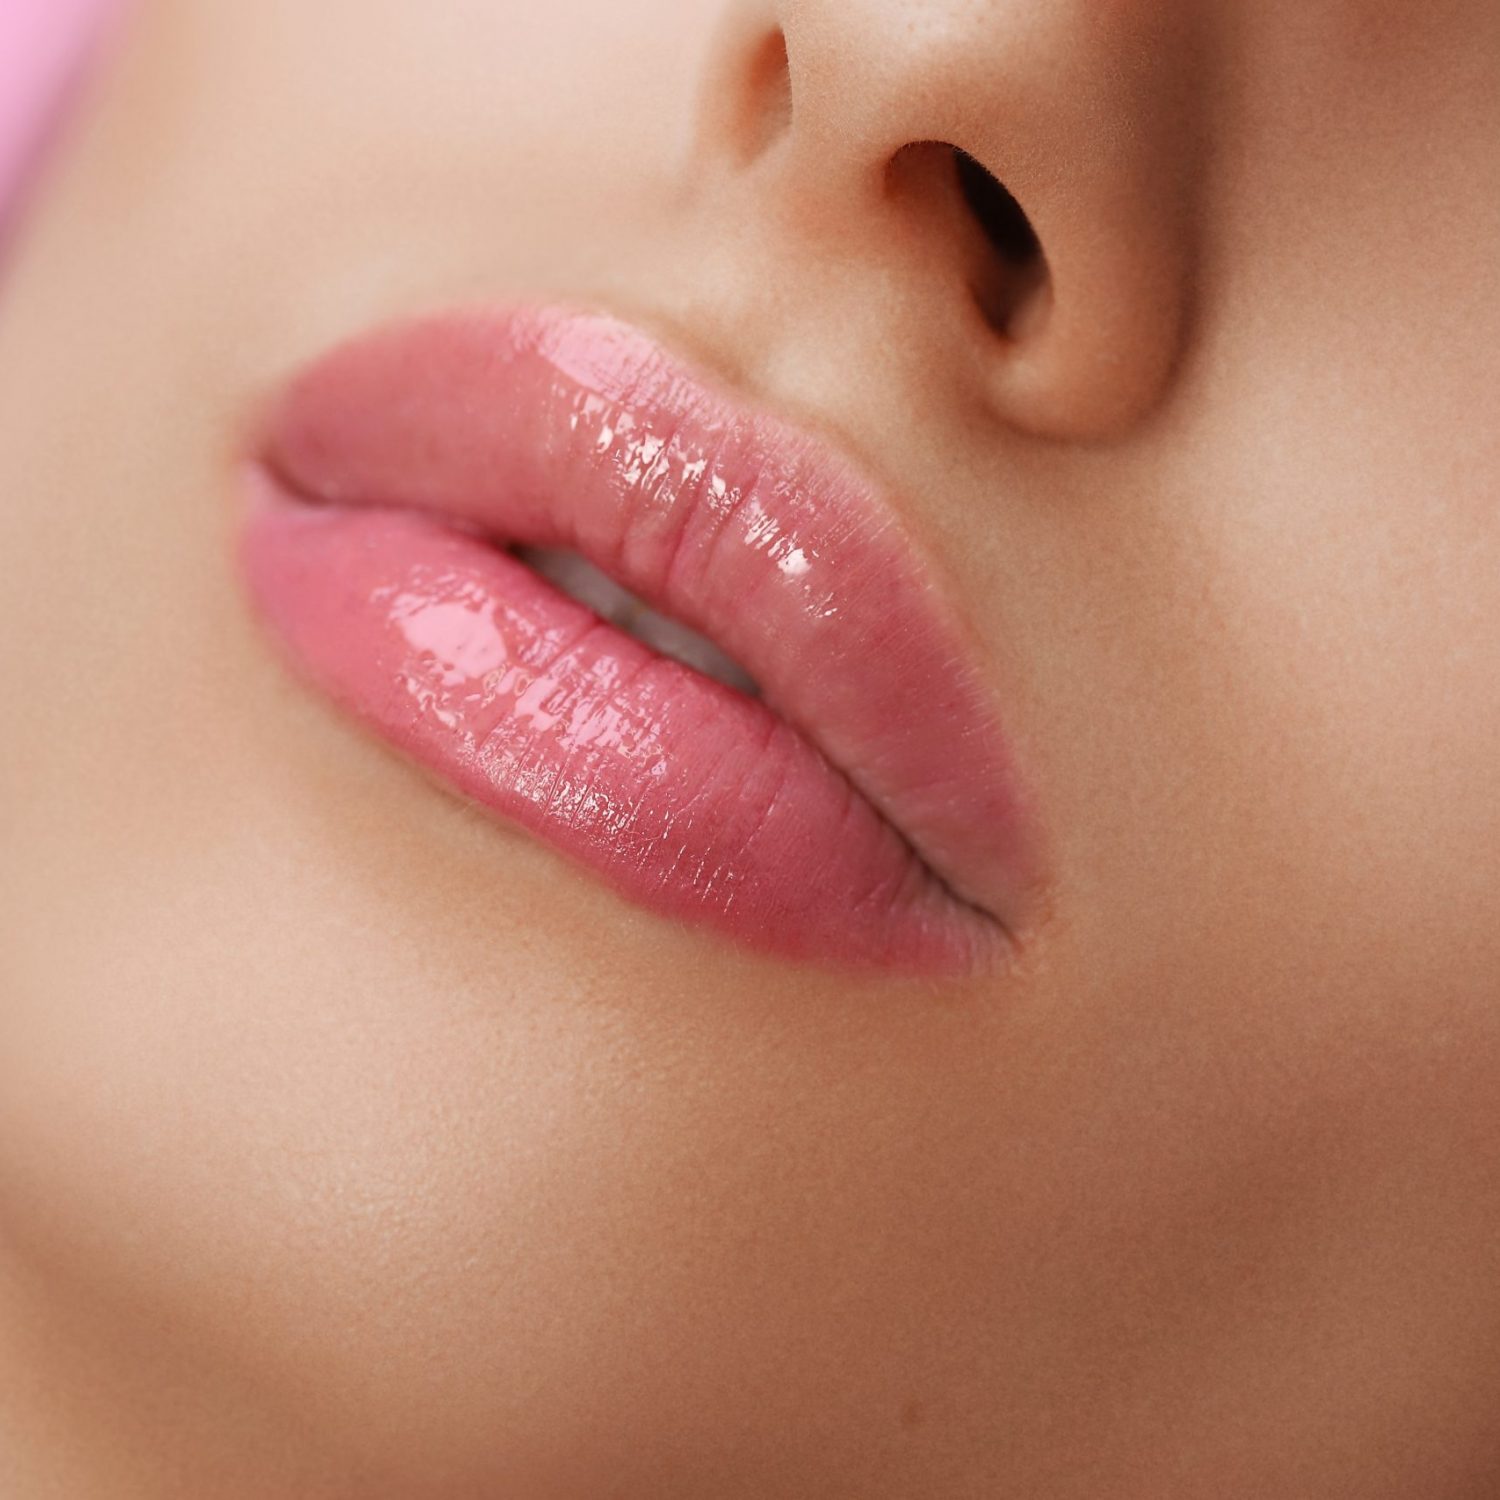 Lip filler can solve a variety of issues - Abilene TX